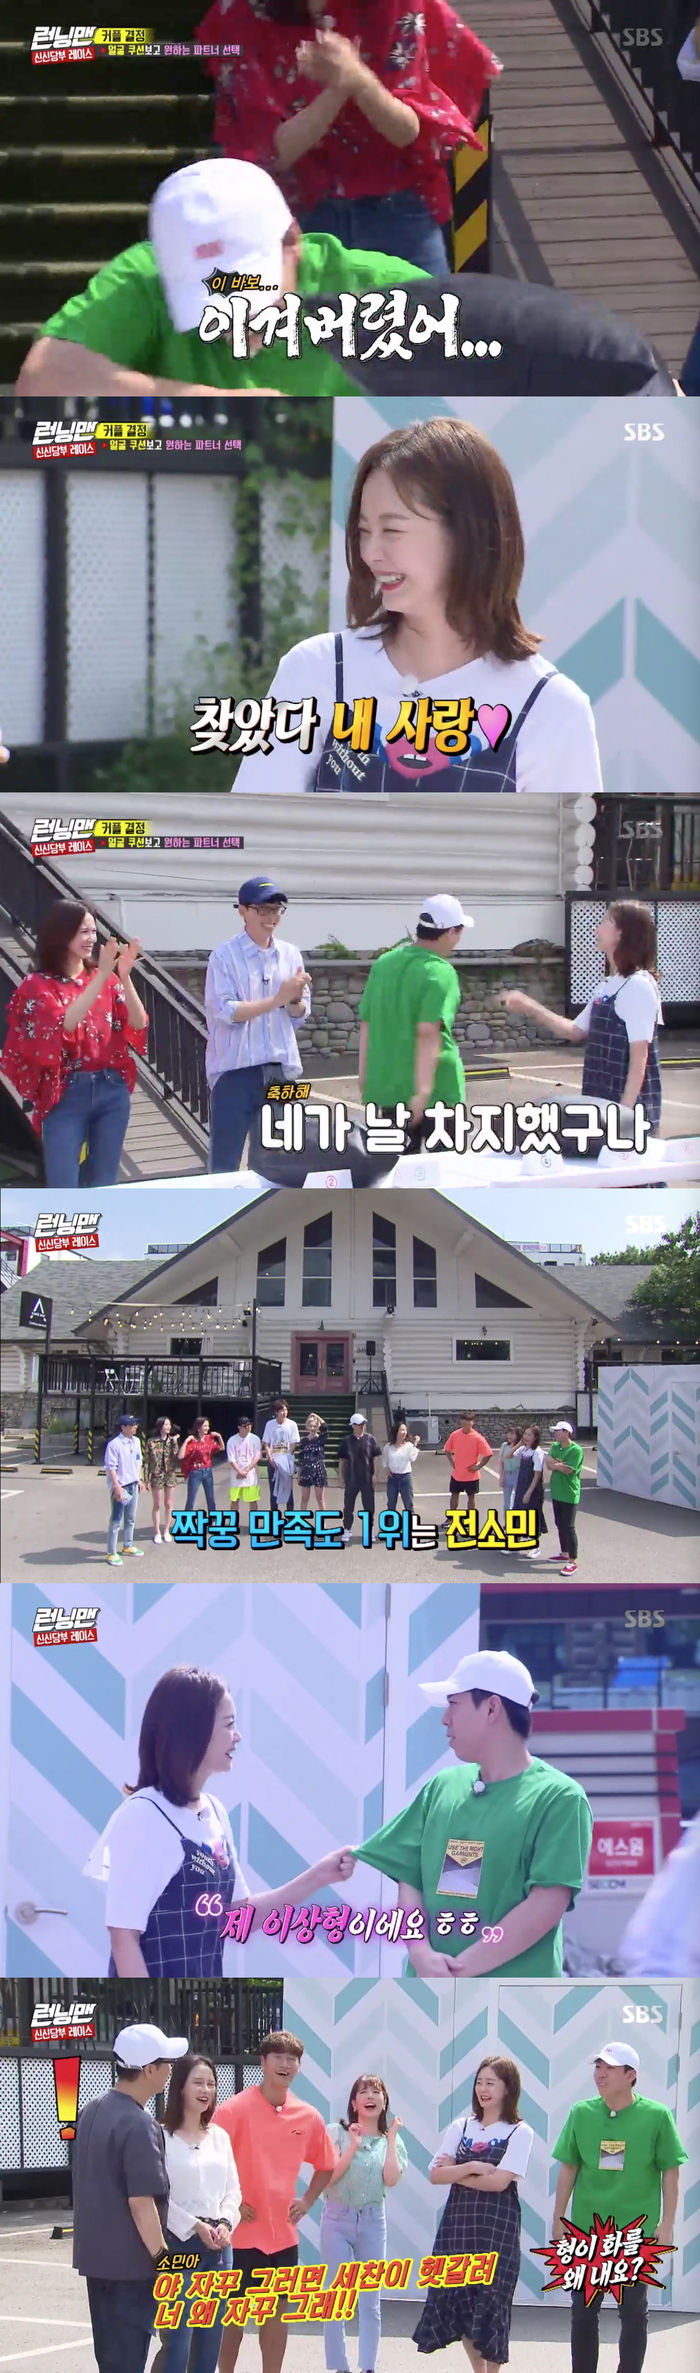 Yang Se-chan and Jeon So-min showed off their same age chemiOn SBS Running Man broadcasted on the 1st, I had time to decide the partner to perform the mission together.On the day of the show, the members selected their partners by looking at the facial cushions they wanted, and each member Choices their desired facial cushions.In particular, the No.6 face cushion was the only one to receive two Choices: Yang Se-chan and Lee Kwang-soo, which attracted Eye-catching.The main characters of each cushion were then released; the main character of the cushion, which received two Choices, was Jeon So-min.Yang Se-chan kicked the cushion with his foot and Lee Kwang-soo also could not hide his disappointed expression.I feel so good, Im not two of them Choices, said Jeon So-min, I ask you for a song, please have me a love song.Yang Se-chan sang the positions I LOVE YOU, and Lee Kwang-soo also seemed to be calling unconditional.Lee Kwang-soo, who watched this, encouraged the competition between the two, saying, If you do not work hard, you will choose. The two of them enthusiastically sang again and laughed.But in the end, Jeon So-mins partner decided to be a scissors rock bogey - the two men who have won a series of draws.Yang Se-chan asked Lee Kwang-soo to win because Ill give you 100,000 won. But the final victory was Yang Se-chan.Yang Se-chan, who won the scissors rock beam, was not happy that he had won, but soon despaired that he and Jeon So-min were a couple.And Jeon So-min congratulated Yang Se-chan, saying, You took me.After all the couples were decided, Yoo Jae-Suk commented, The top place in the satisfaction of the pair is Yang Se-chan and Jeon So-min.Yang Se-chan said, Somin keeps following Sunny, he keeps saying he is ideal.In fact, Jeon So-min told Yang Se-chan, Its an ideal, which attracted Eye-catching.Ji Seok-jin, who saw this, said, If you do, you will be confused.Yang Se-chan said, But why do you get angry? And Sunny said, Oh, giggles.